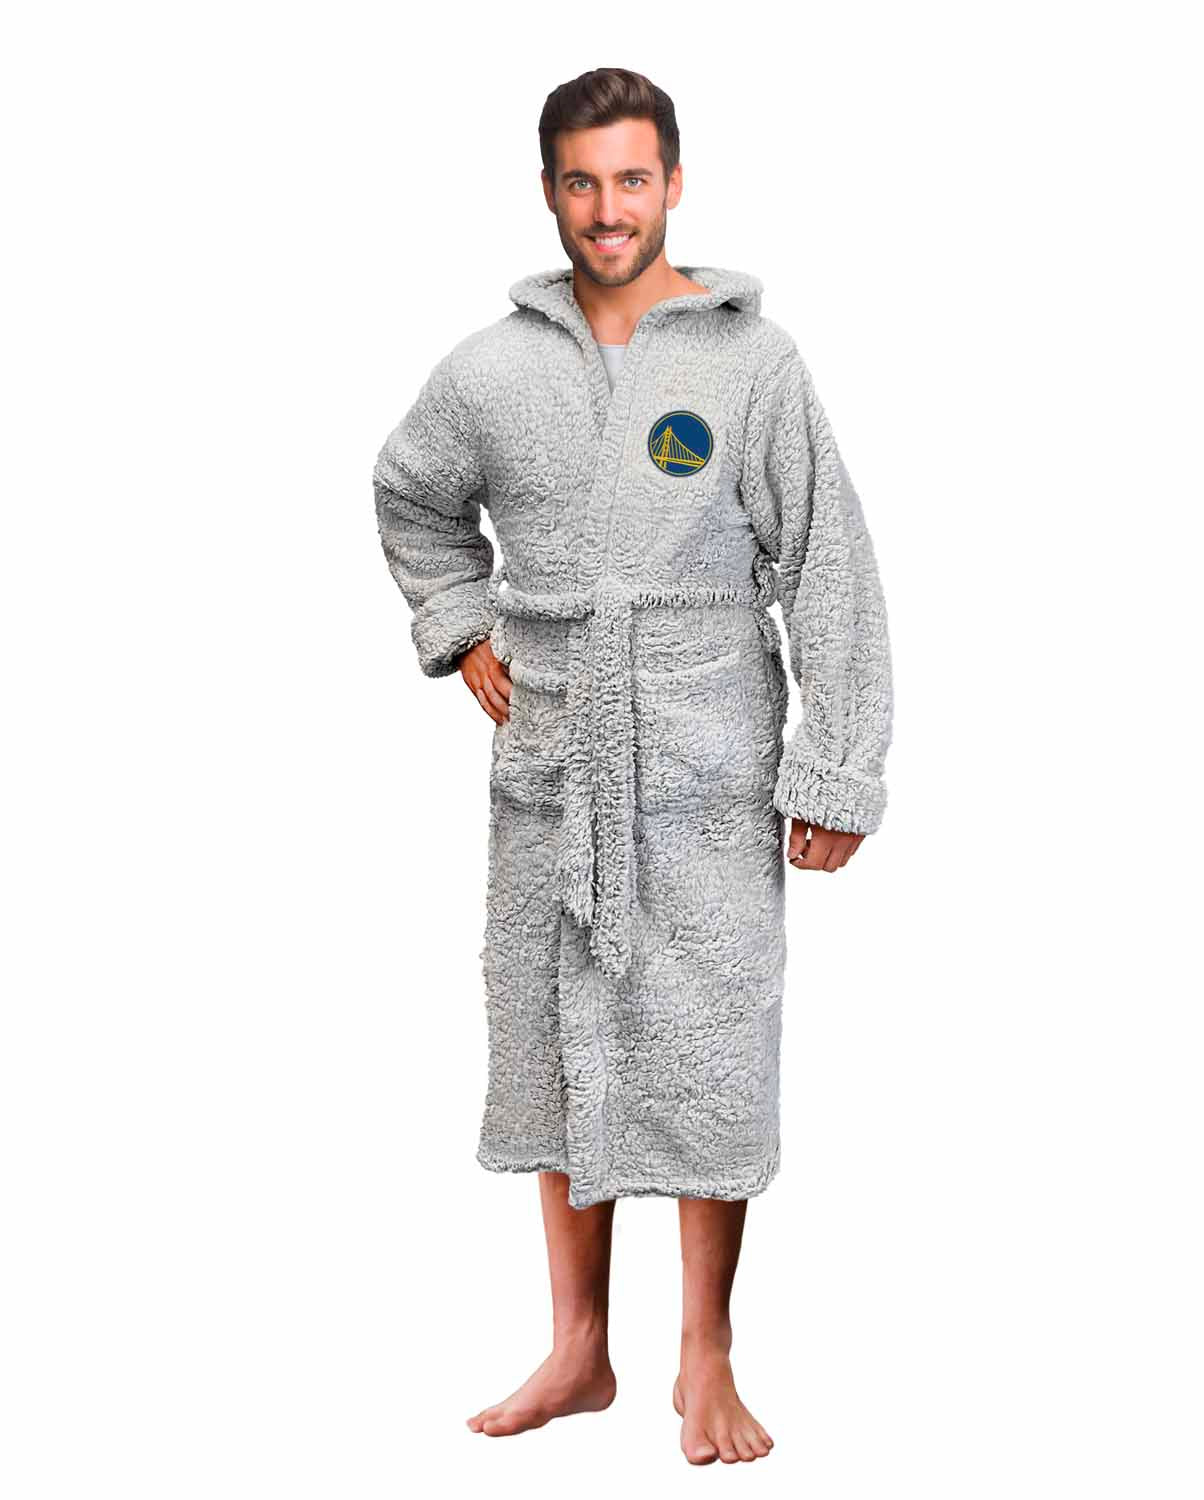 Golden State Warriors NBA Adult Plush Hooded Robe with Pockets - Gray